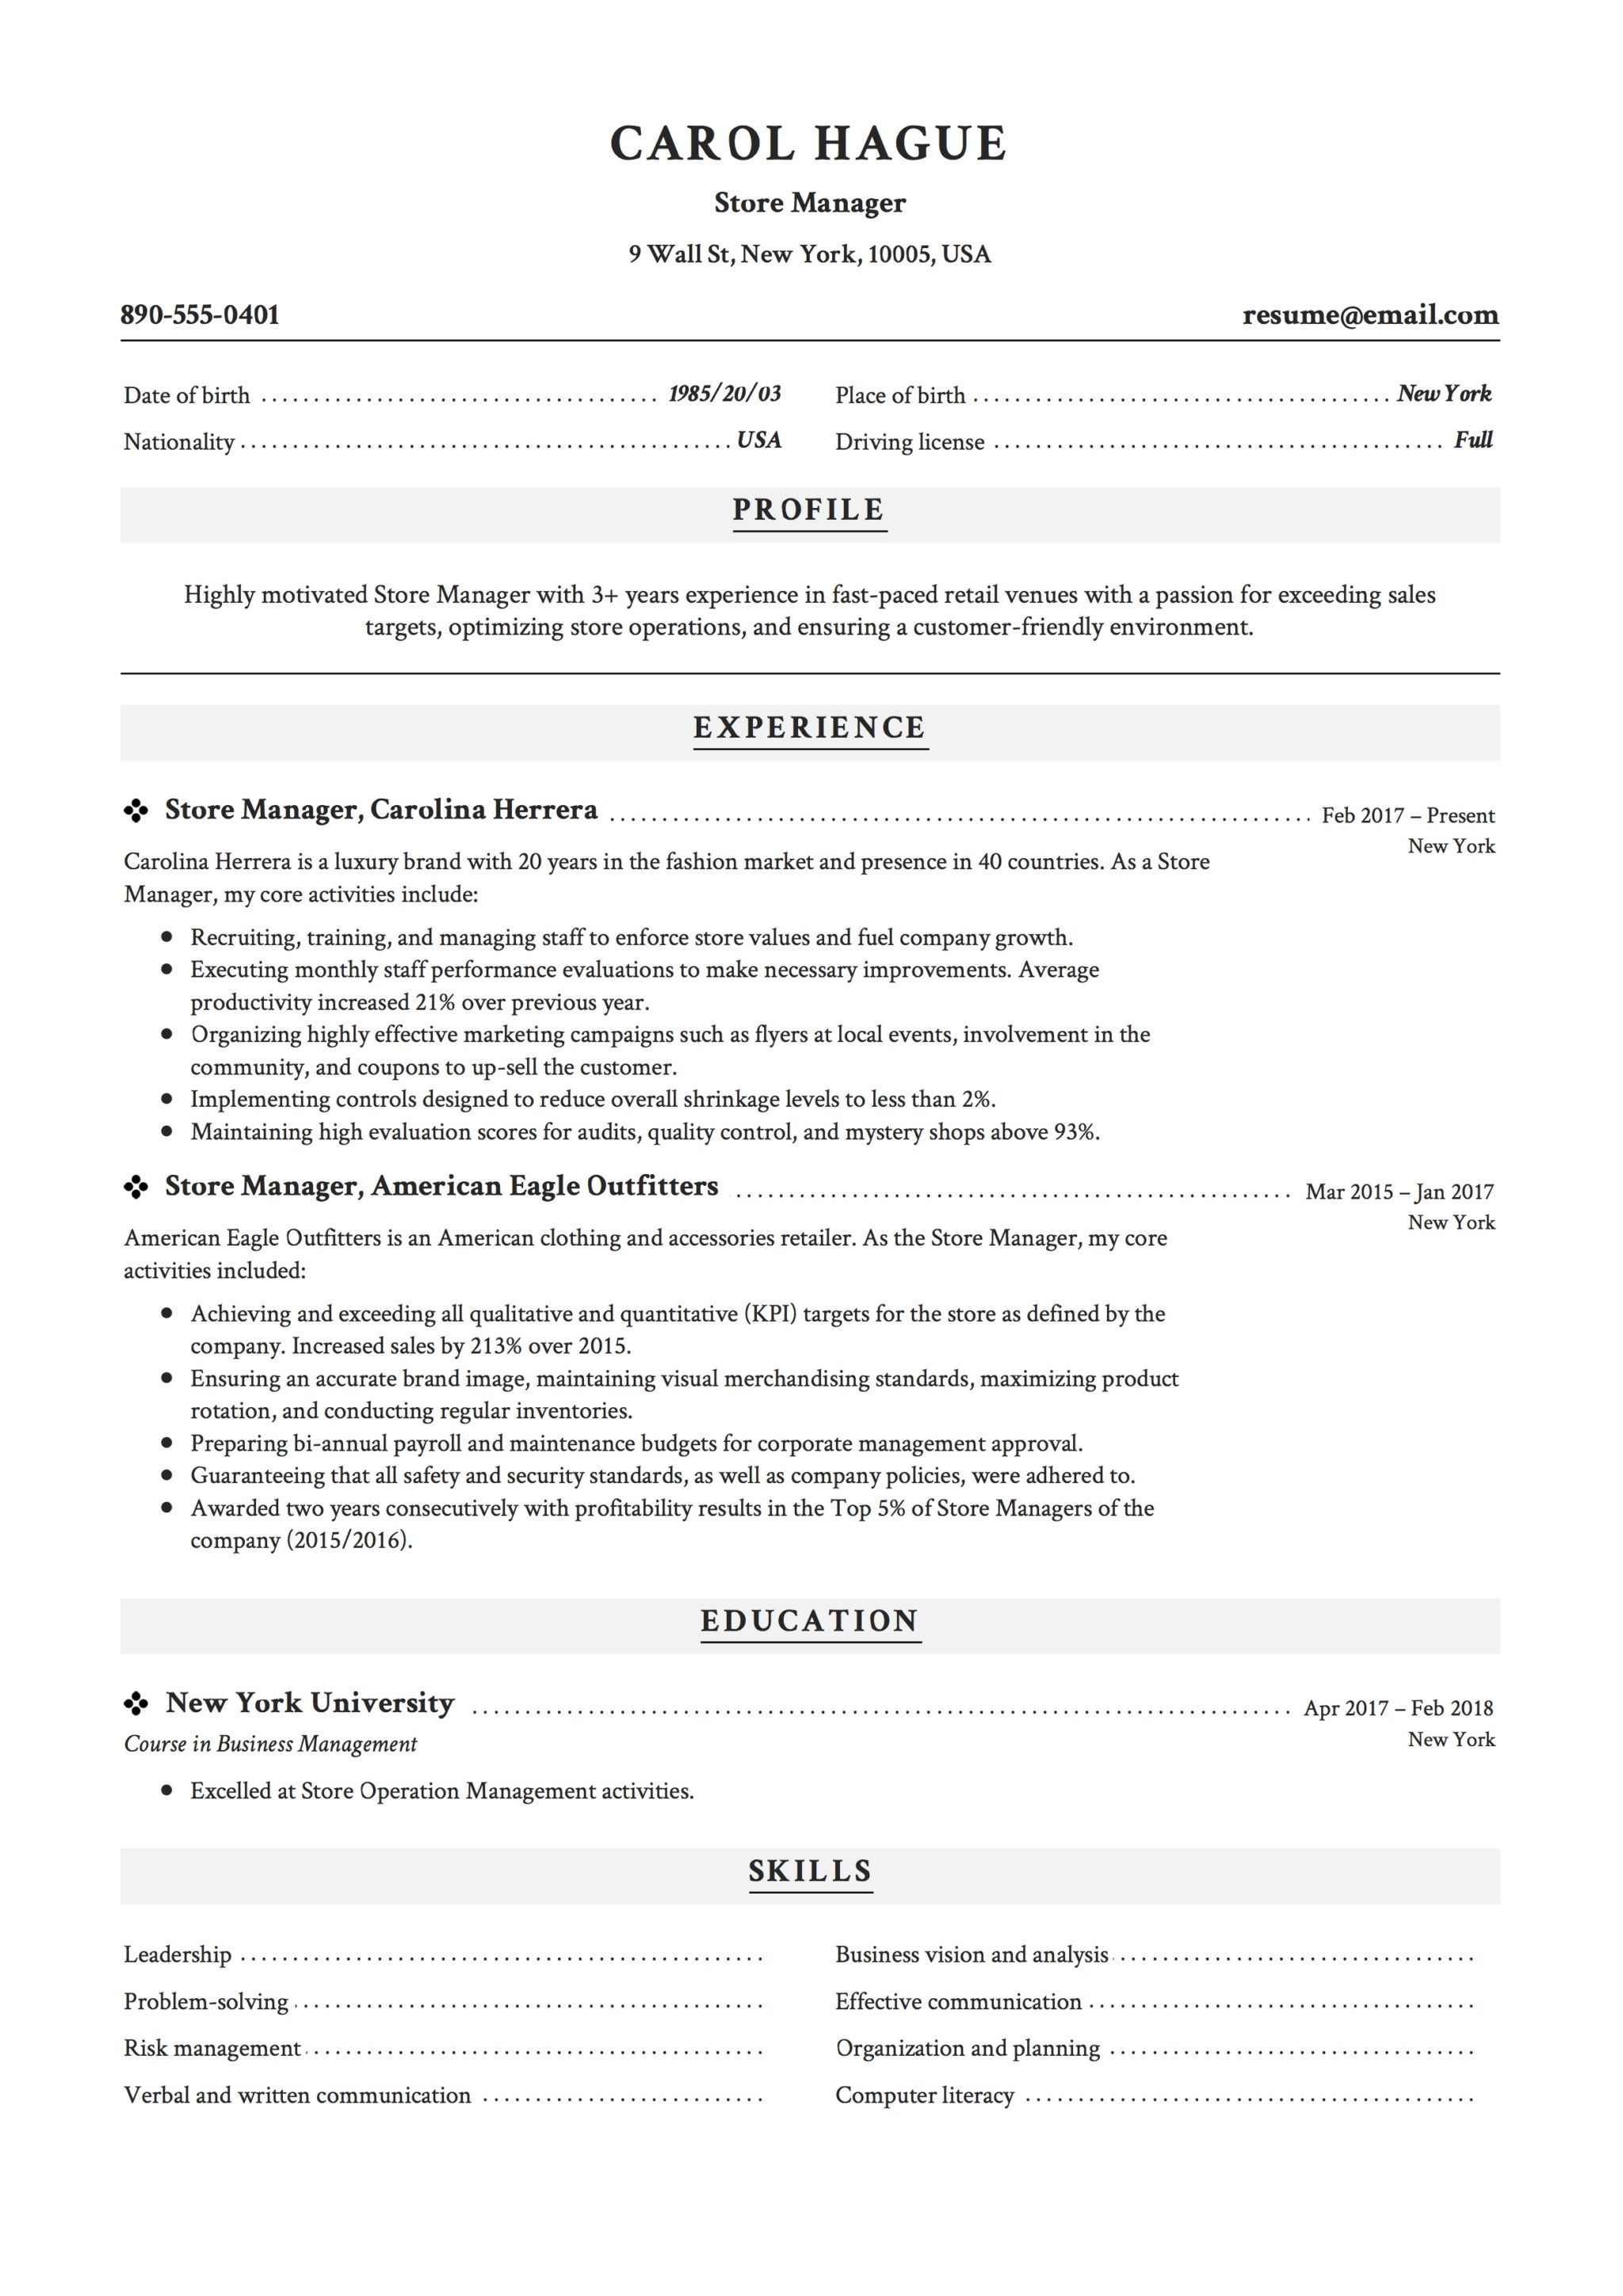 Professional Store Manager Resume Example